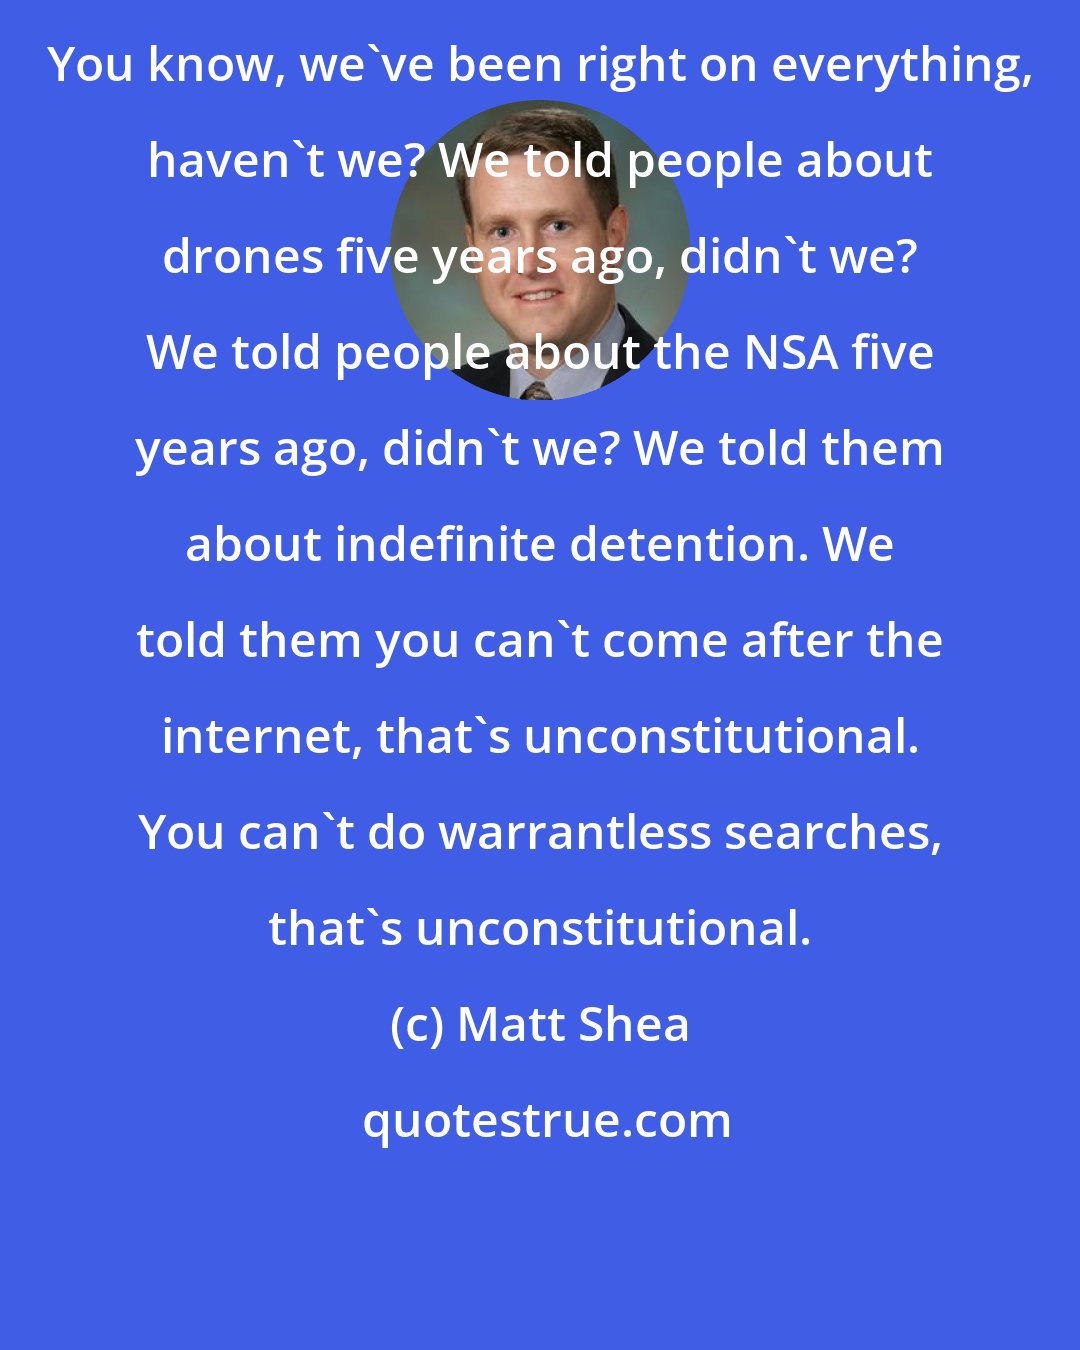 Matt Shea: You know, we've been right on everything, haven't we? We told people about drones five years ago, didn't we? We told people about the NSA five years ago, didn't we? We told them about indefinite detention. We told them you can't come after the internet, that's unconstitutional. You can't do warrantless searches, that's unconstitutional.